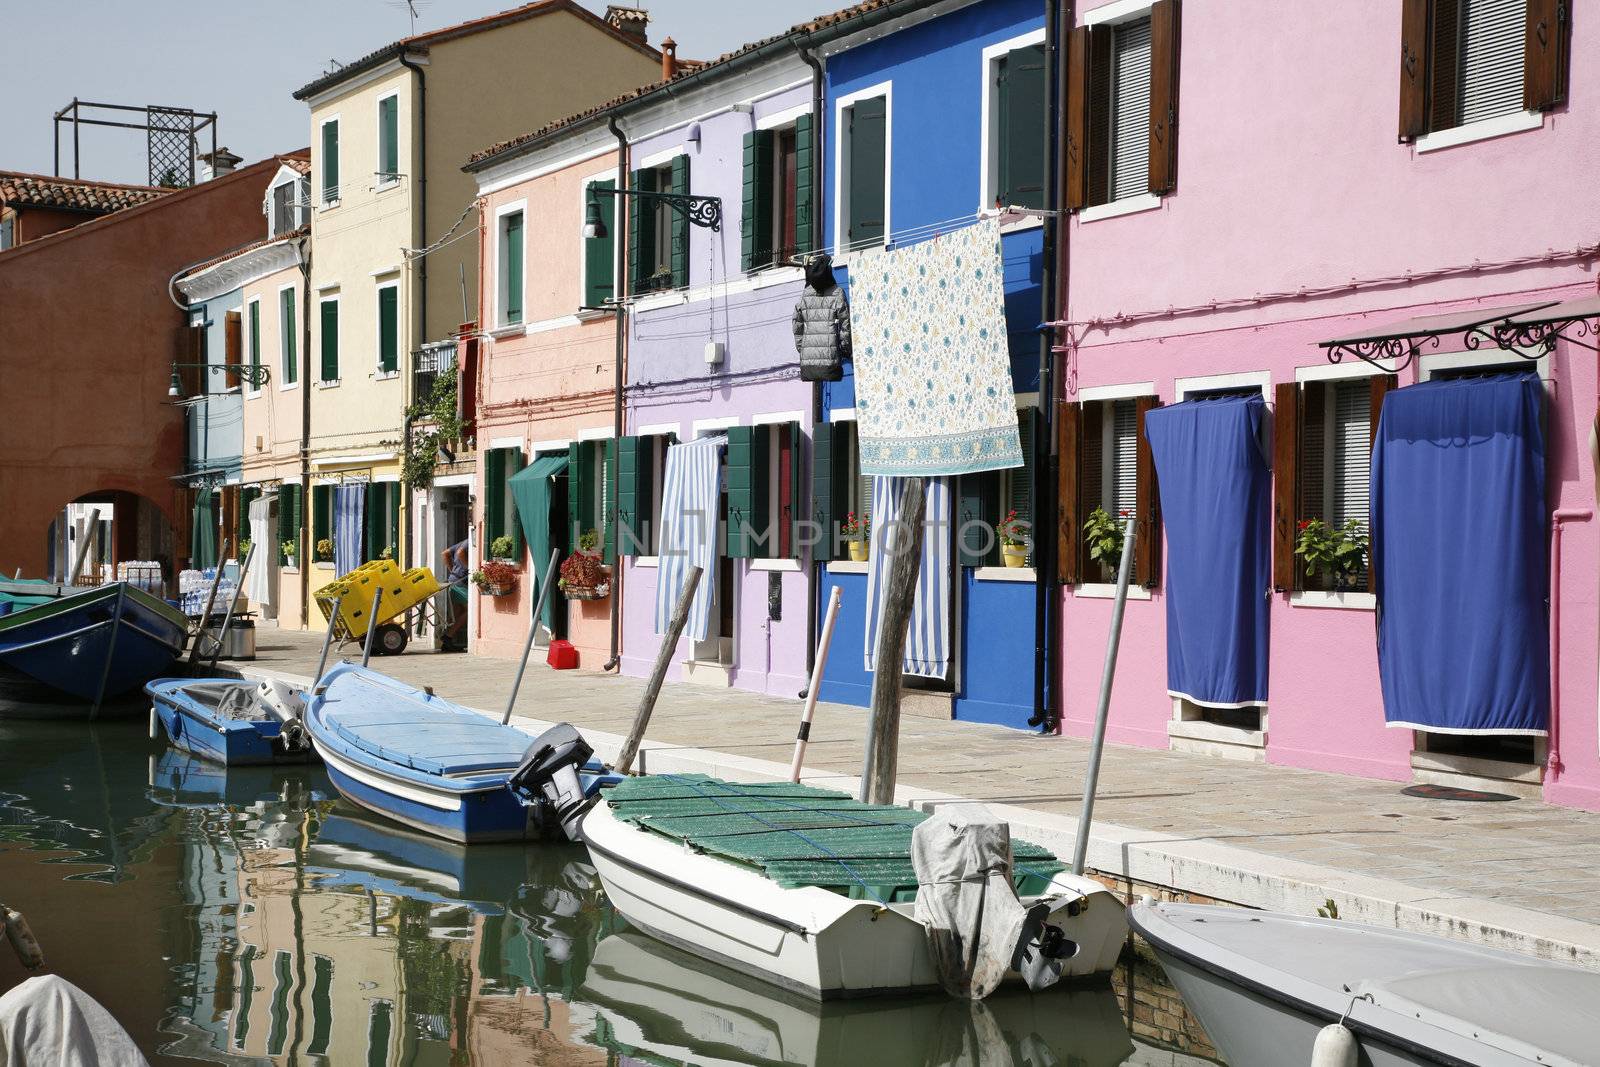 Colorful houses on the island of Burano in the Venetian lagoon - Italy. Just 30 minutes from the center of the town.